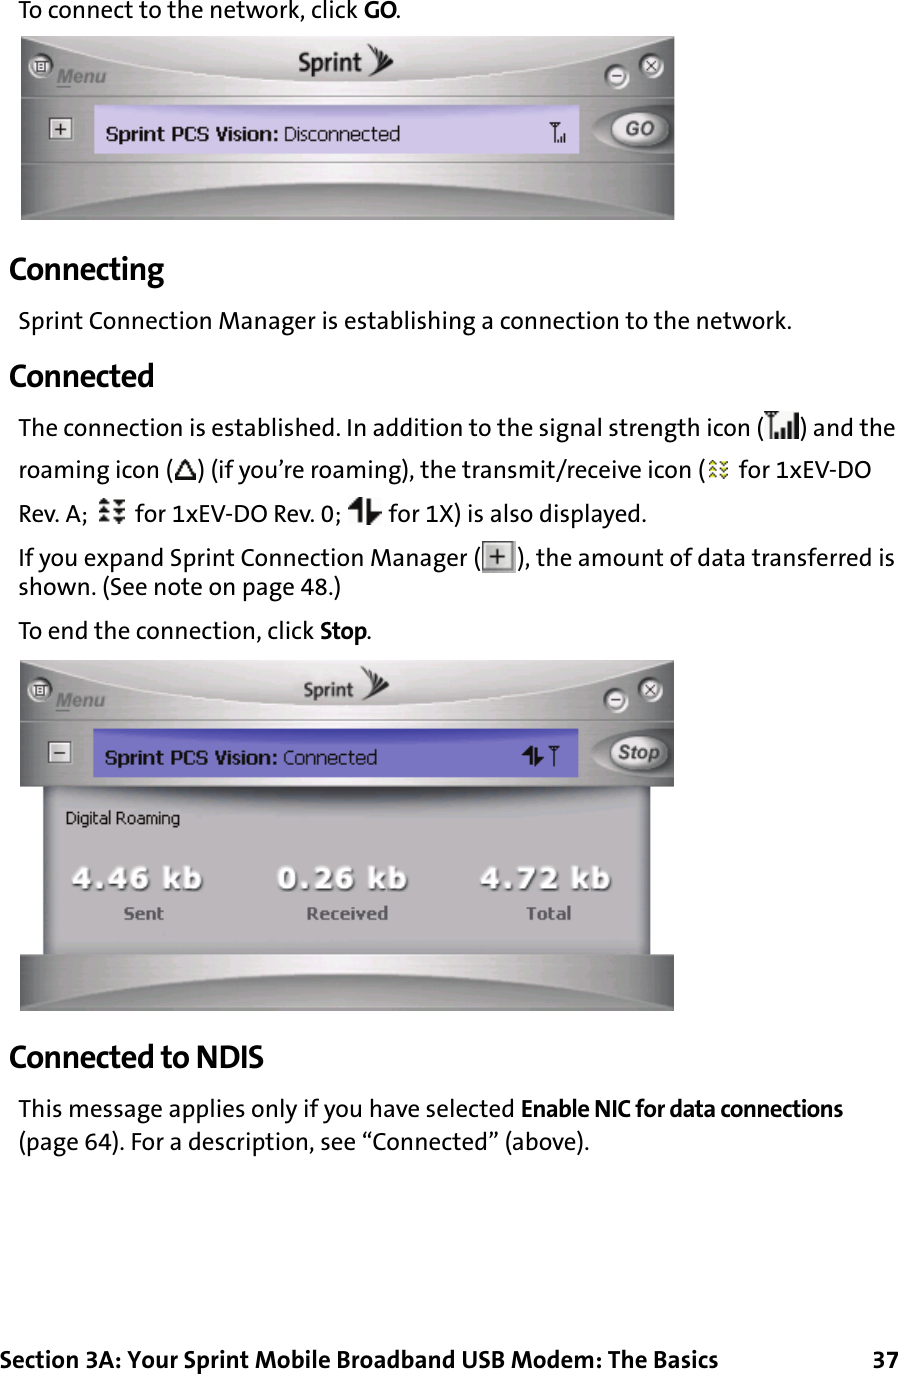 Section 3A: Your Sprint Mobile Broadband USB Modem: The Basics      37To connect to the network, click GO.ConnectingSprint Connection Manager is establishing a connection to the network.ConnectedThe connection is established. In addition to the signal strength icon ( ) and the roaming icon ( ) (if you’re roaming), the transmit/receive icon (  for 1xEV-DO Rev. A;   for 1xEV-DO Rev. 0;   for 1X) is also displayed.If you expand Sprint Connection Manager ( ), the amount of data transferred is shown. (See note on page 48.)To end the connection, click Stop.Connected to NDISThis message applies only if you have selected Enable NIC for data connections (page 64). For a description, see “Connected” (above).